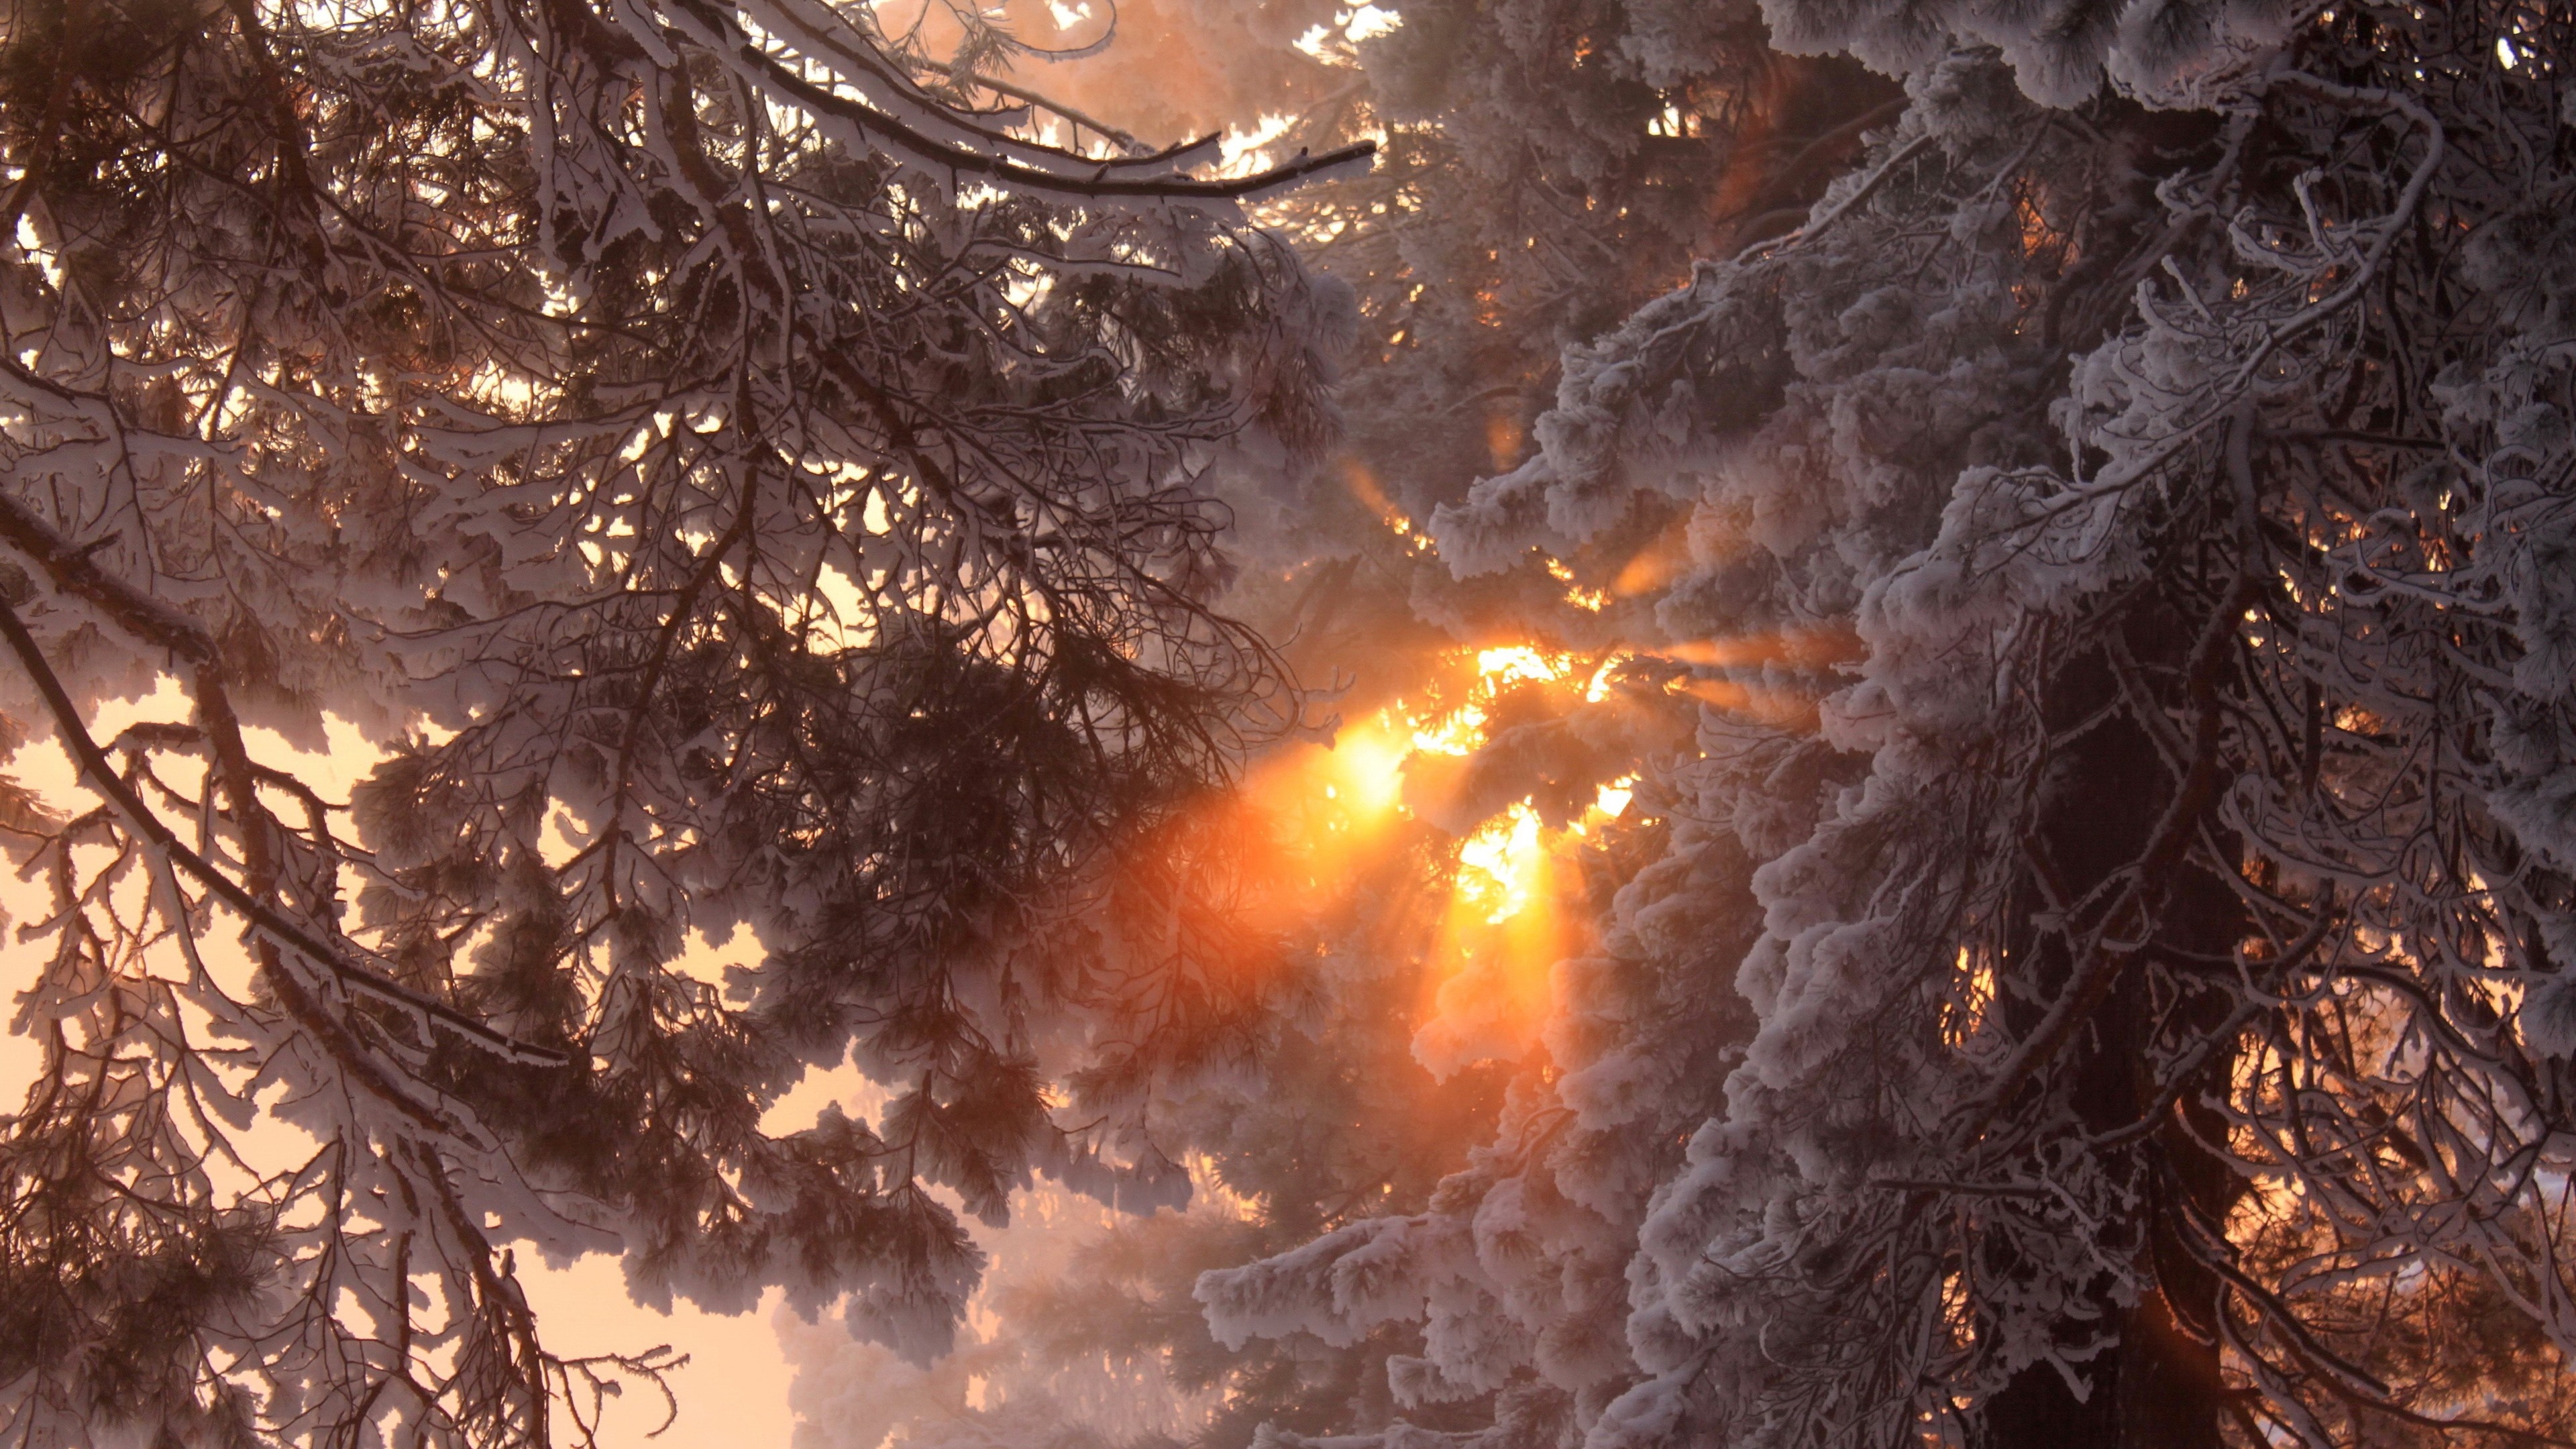 Wallpapers Thick snow, trees, winter, sun rays 3840x2160 UHD 4K Picture, Image